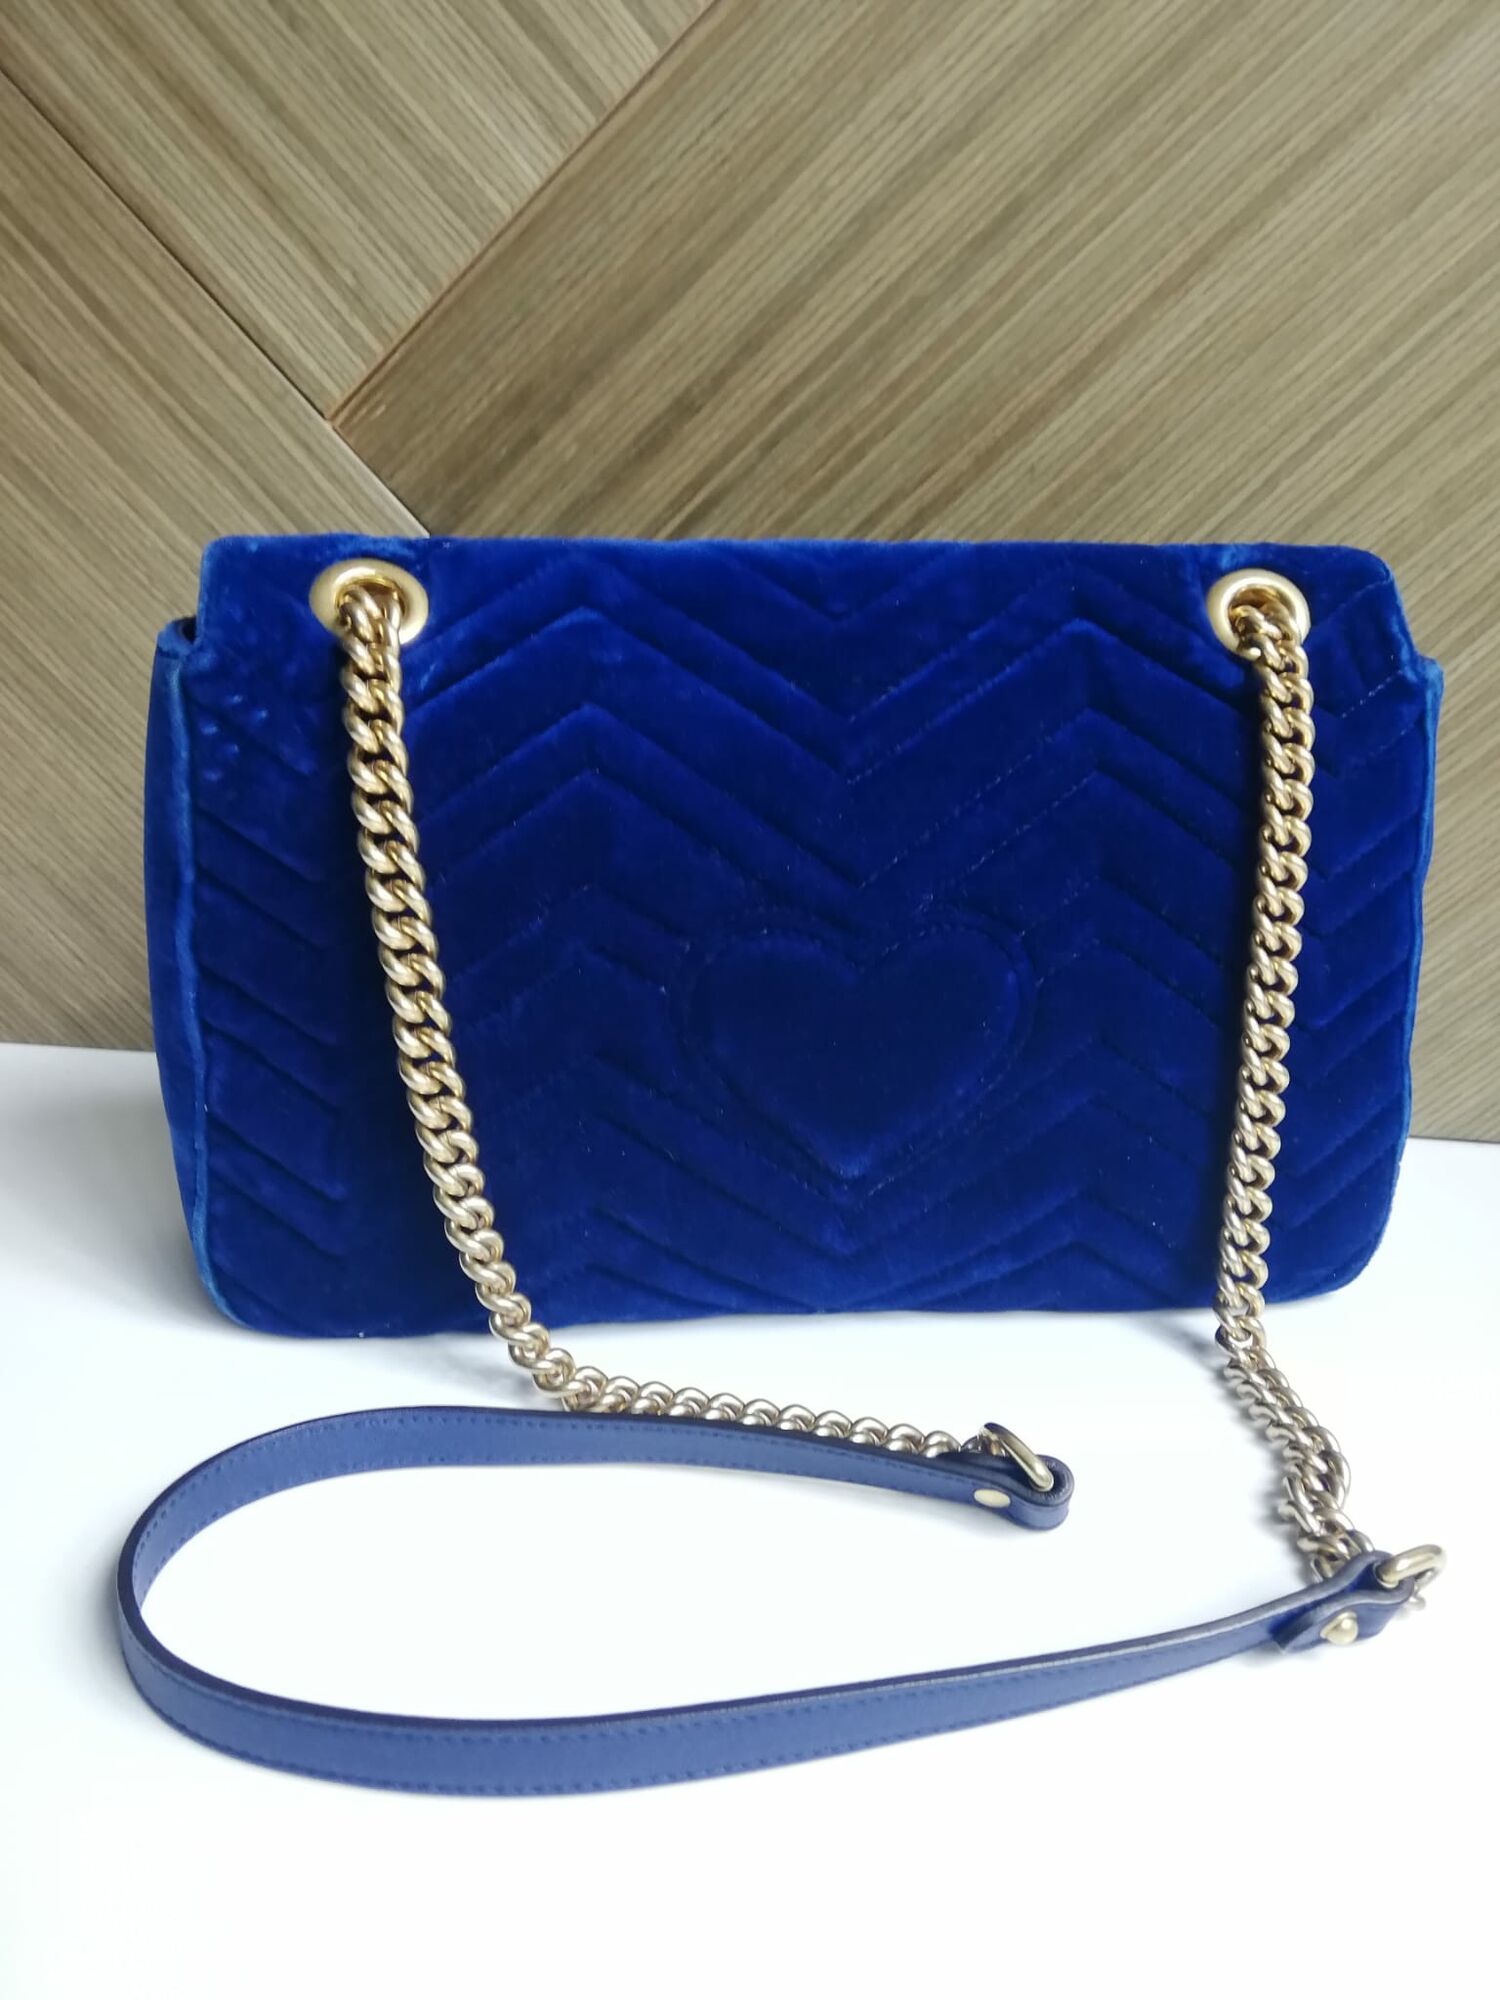 Quilted Velvet Marmont Bag